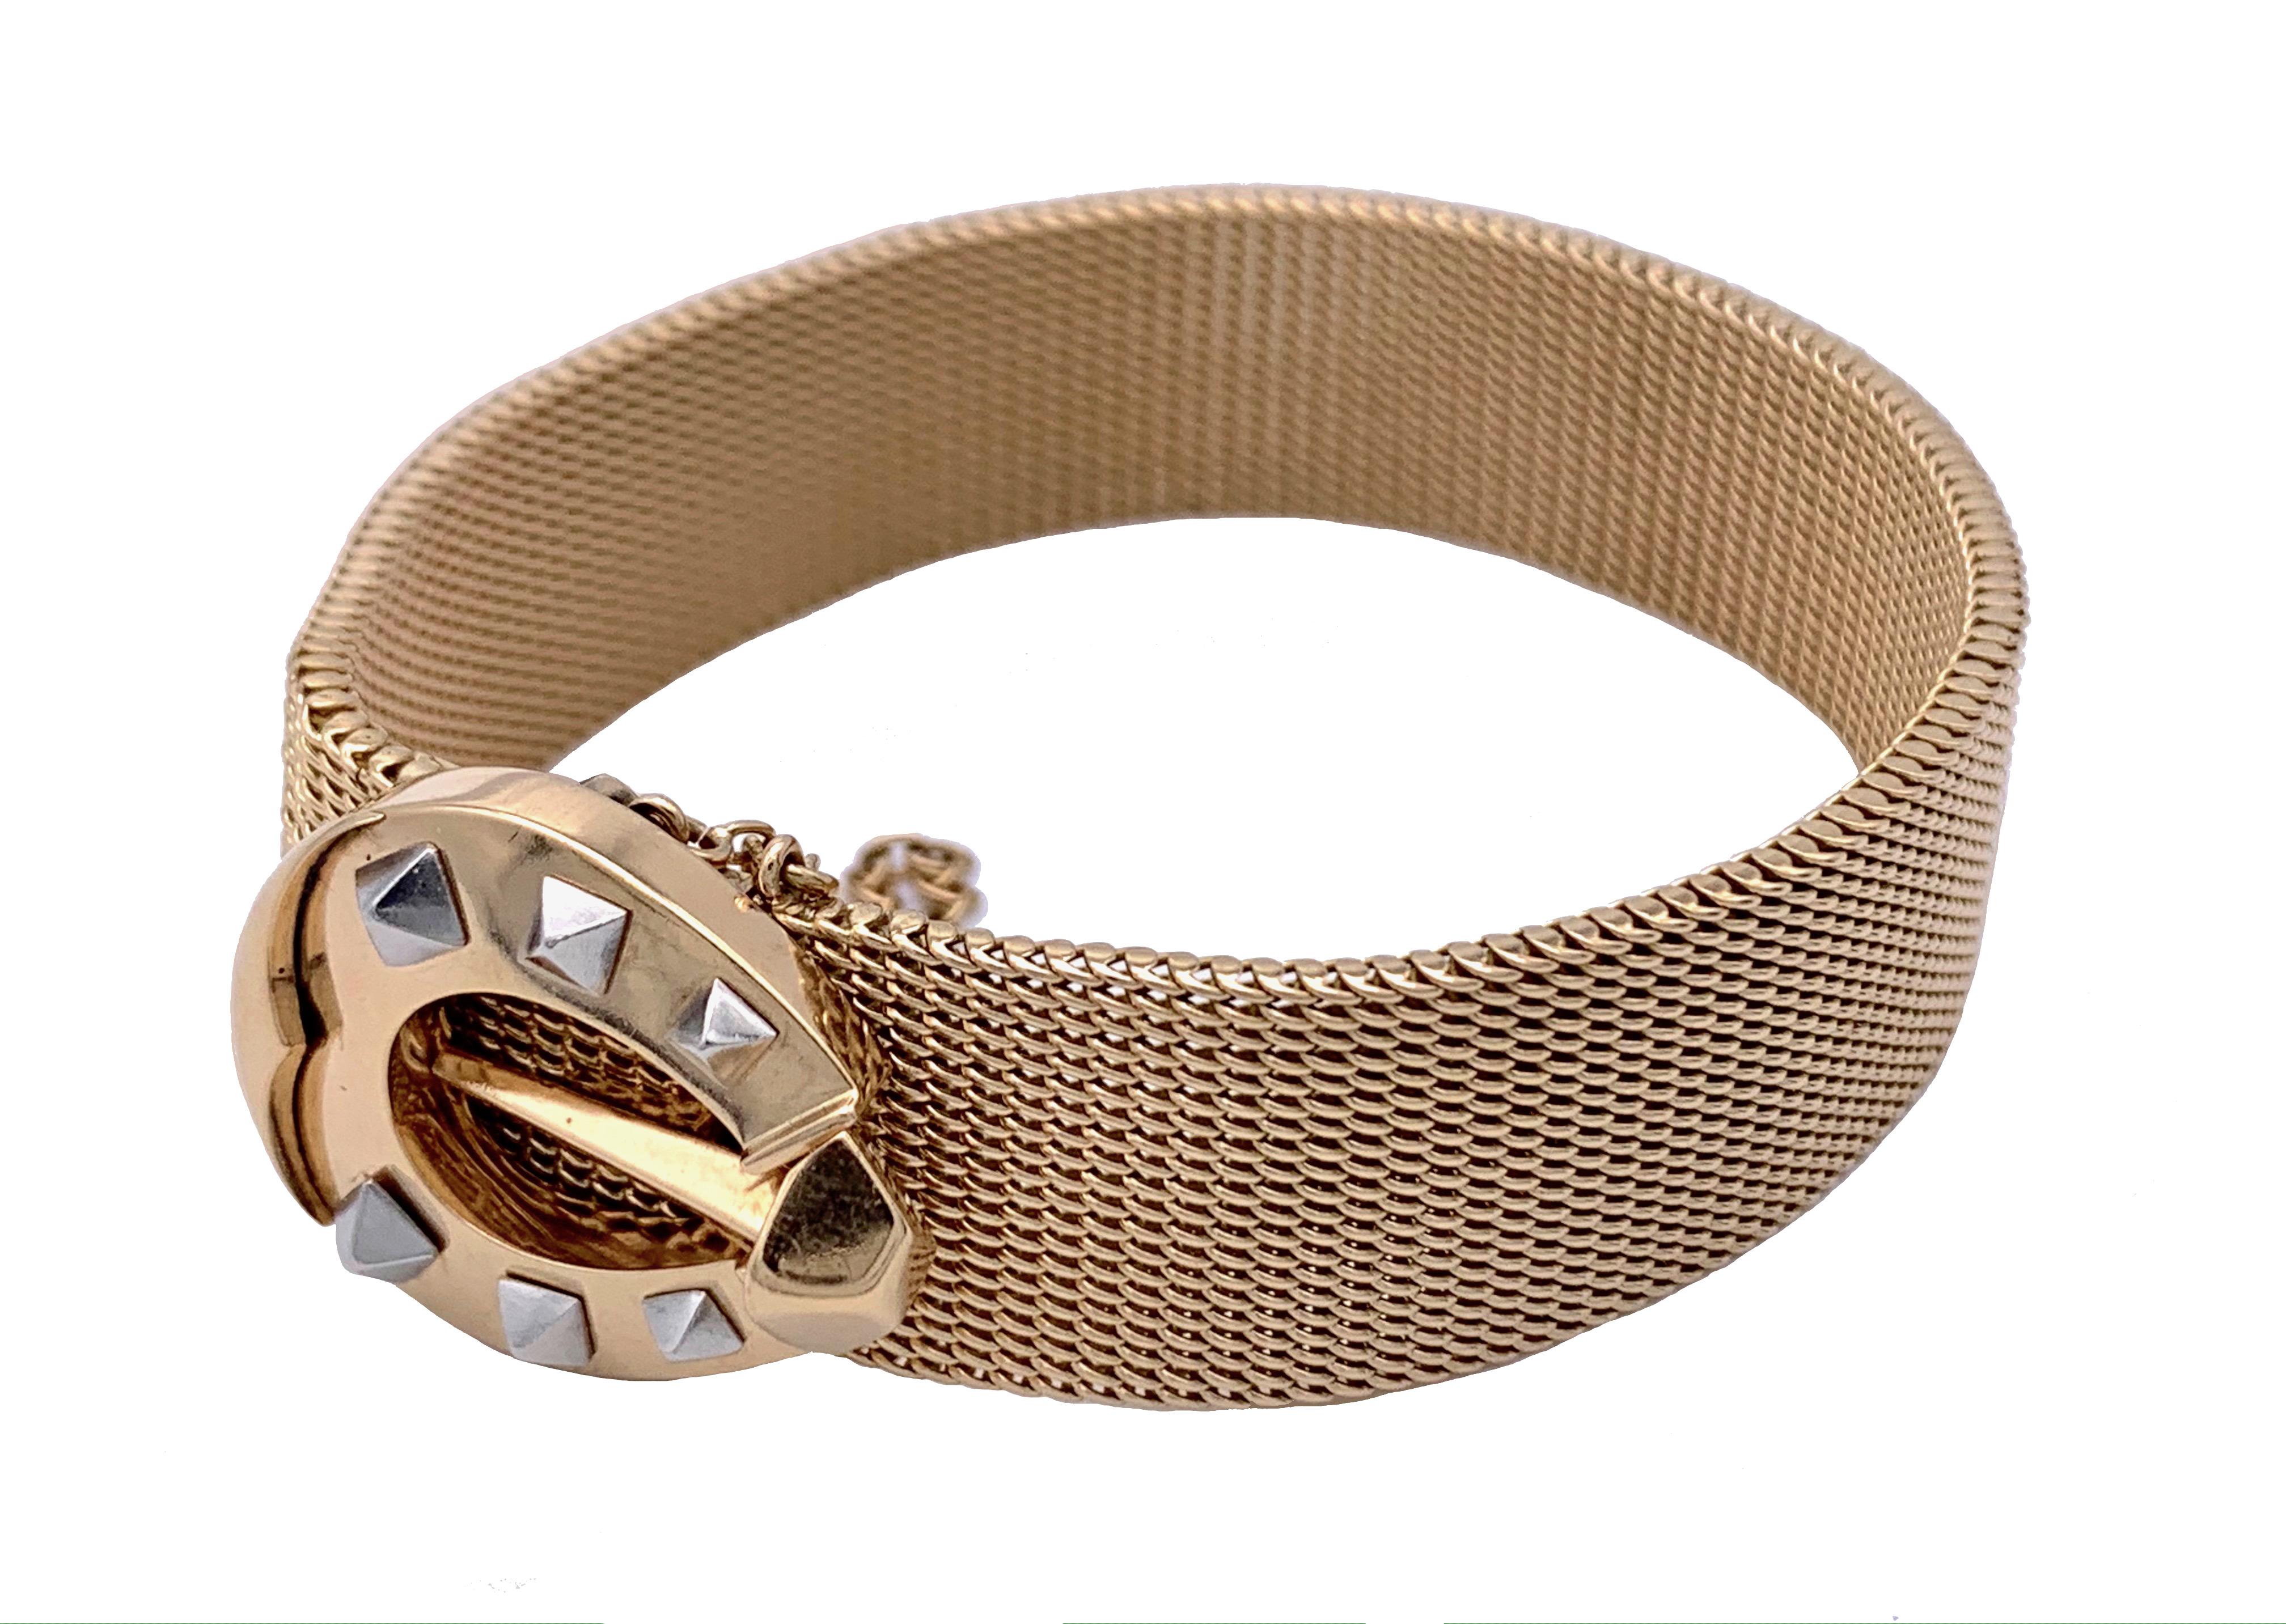 This elegant Retro woven reddish gold bracelet features a wonderful horse shoe clasp with white gold horse nails.